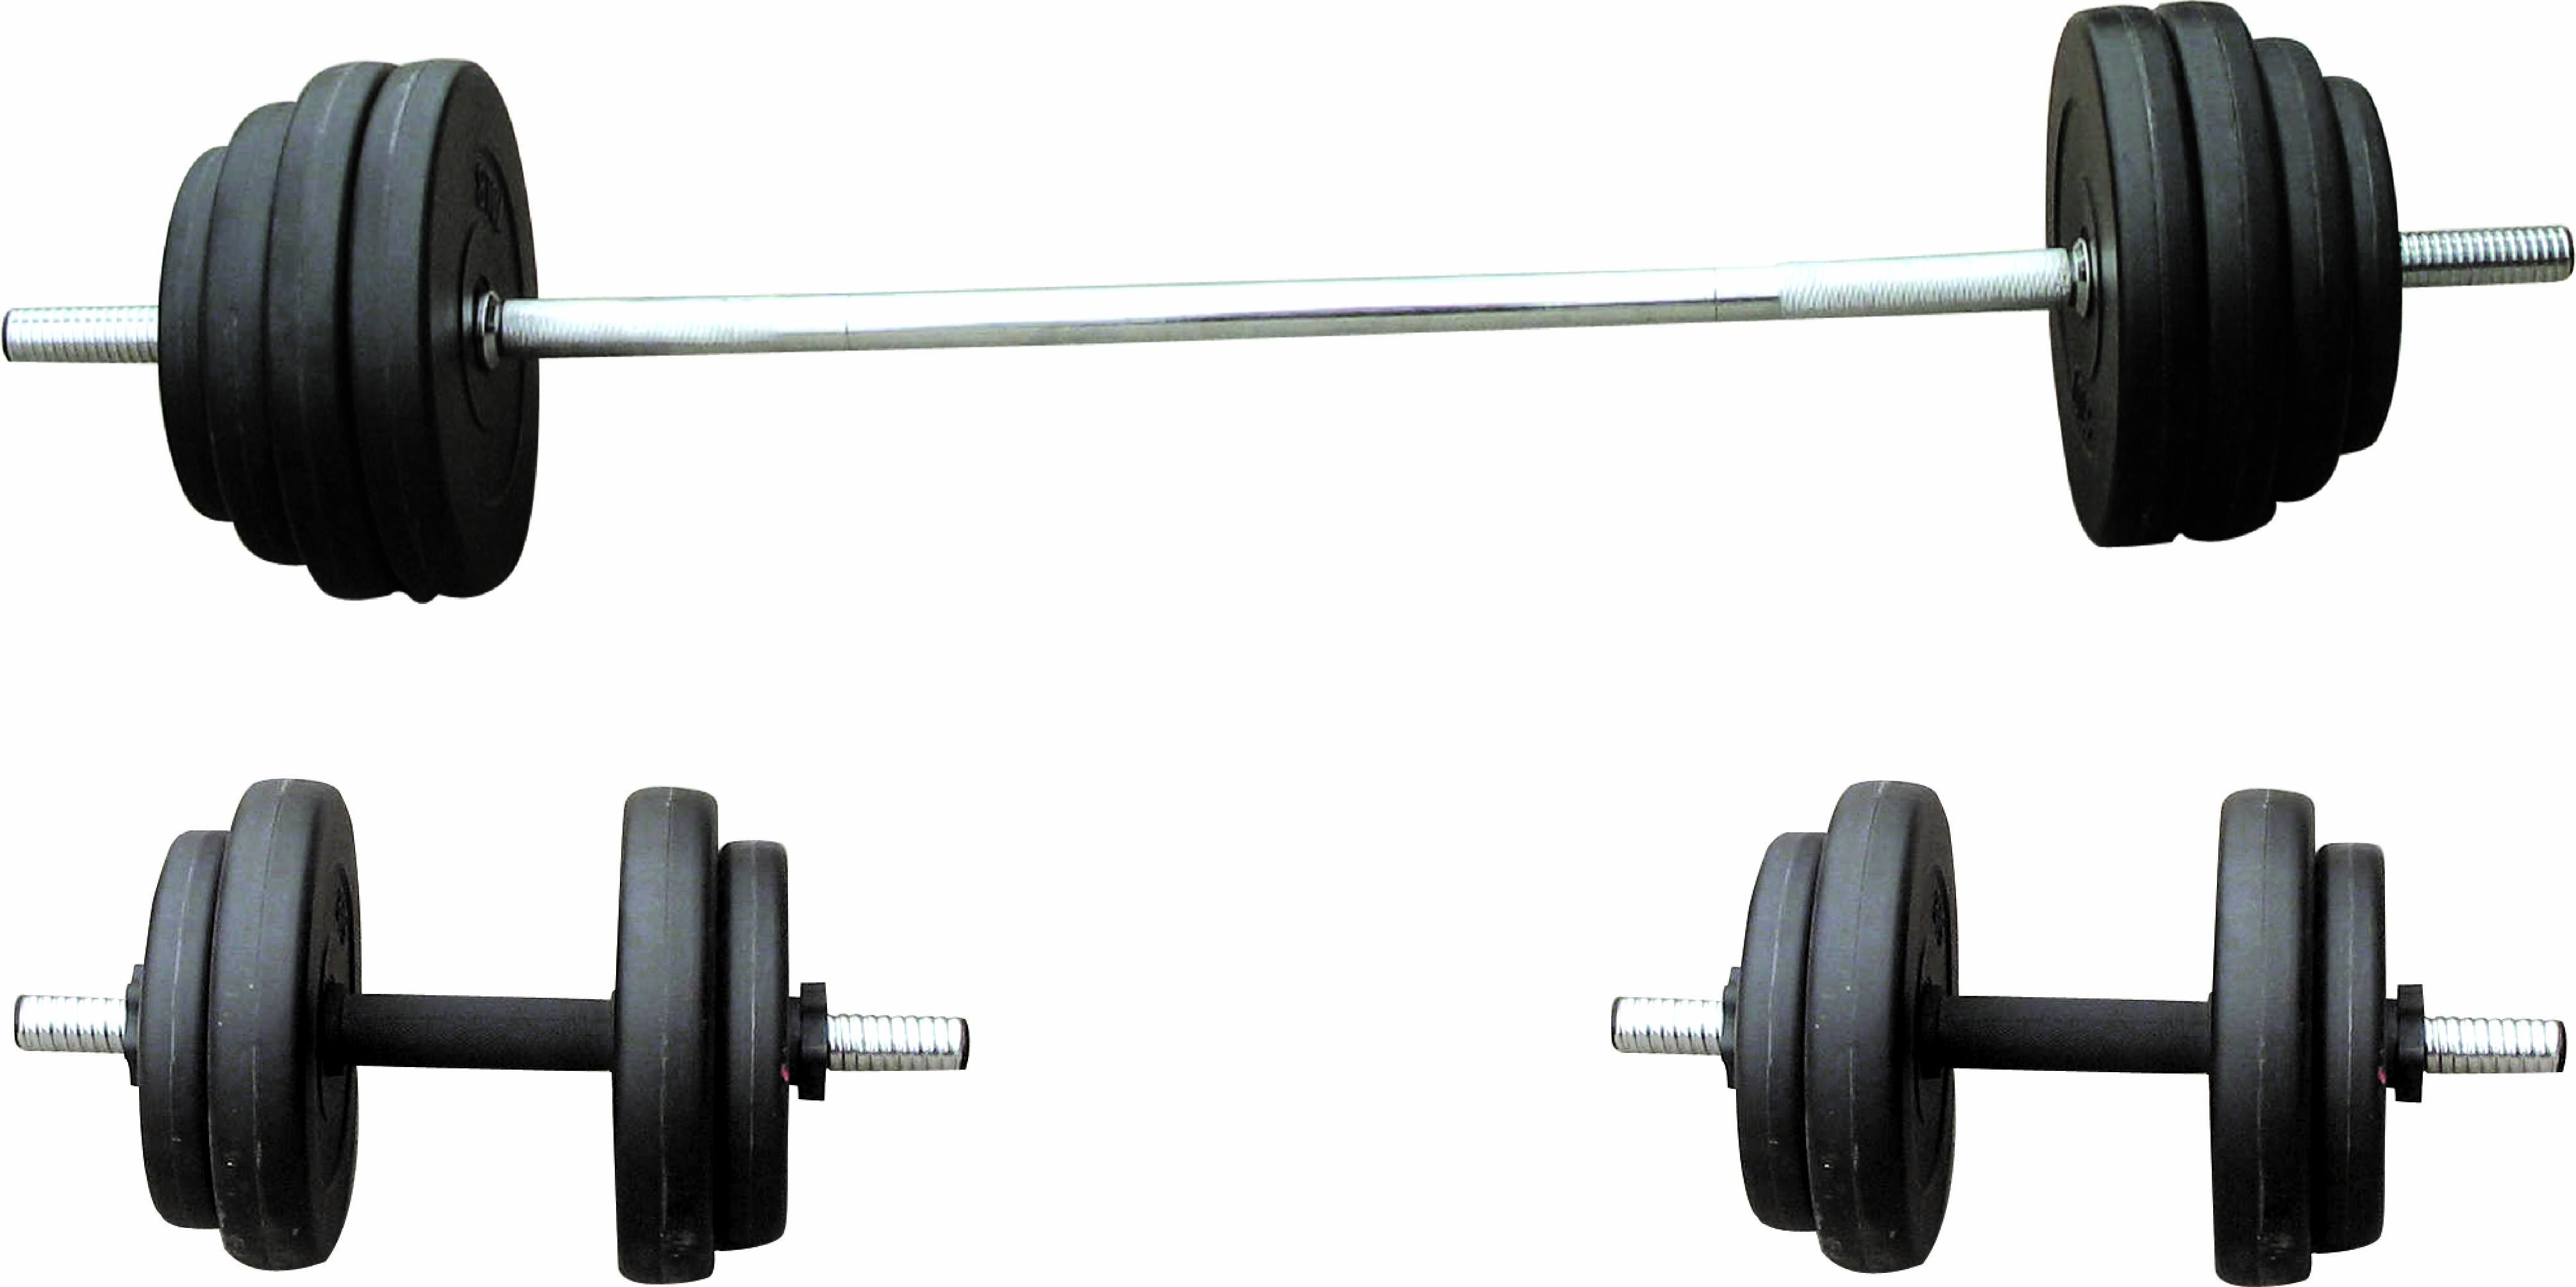 Barbell Pictures   Clipart Best